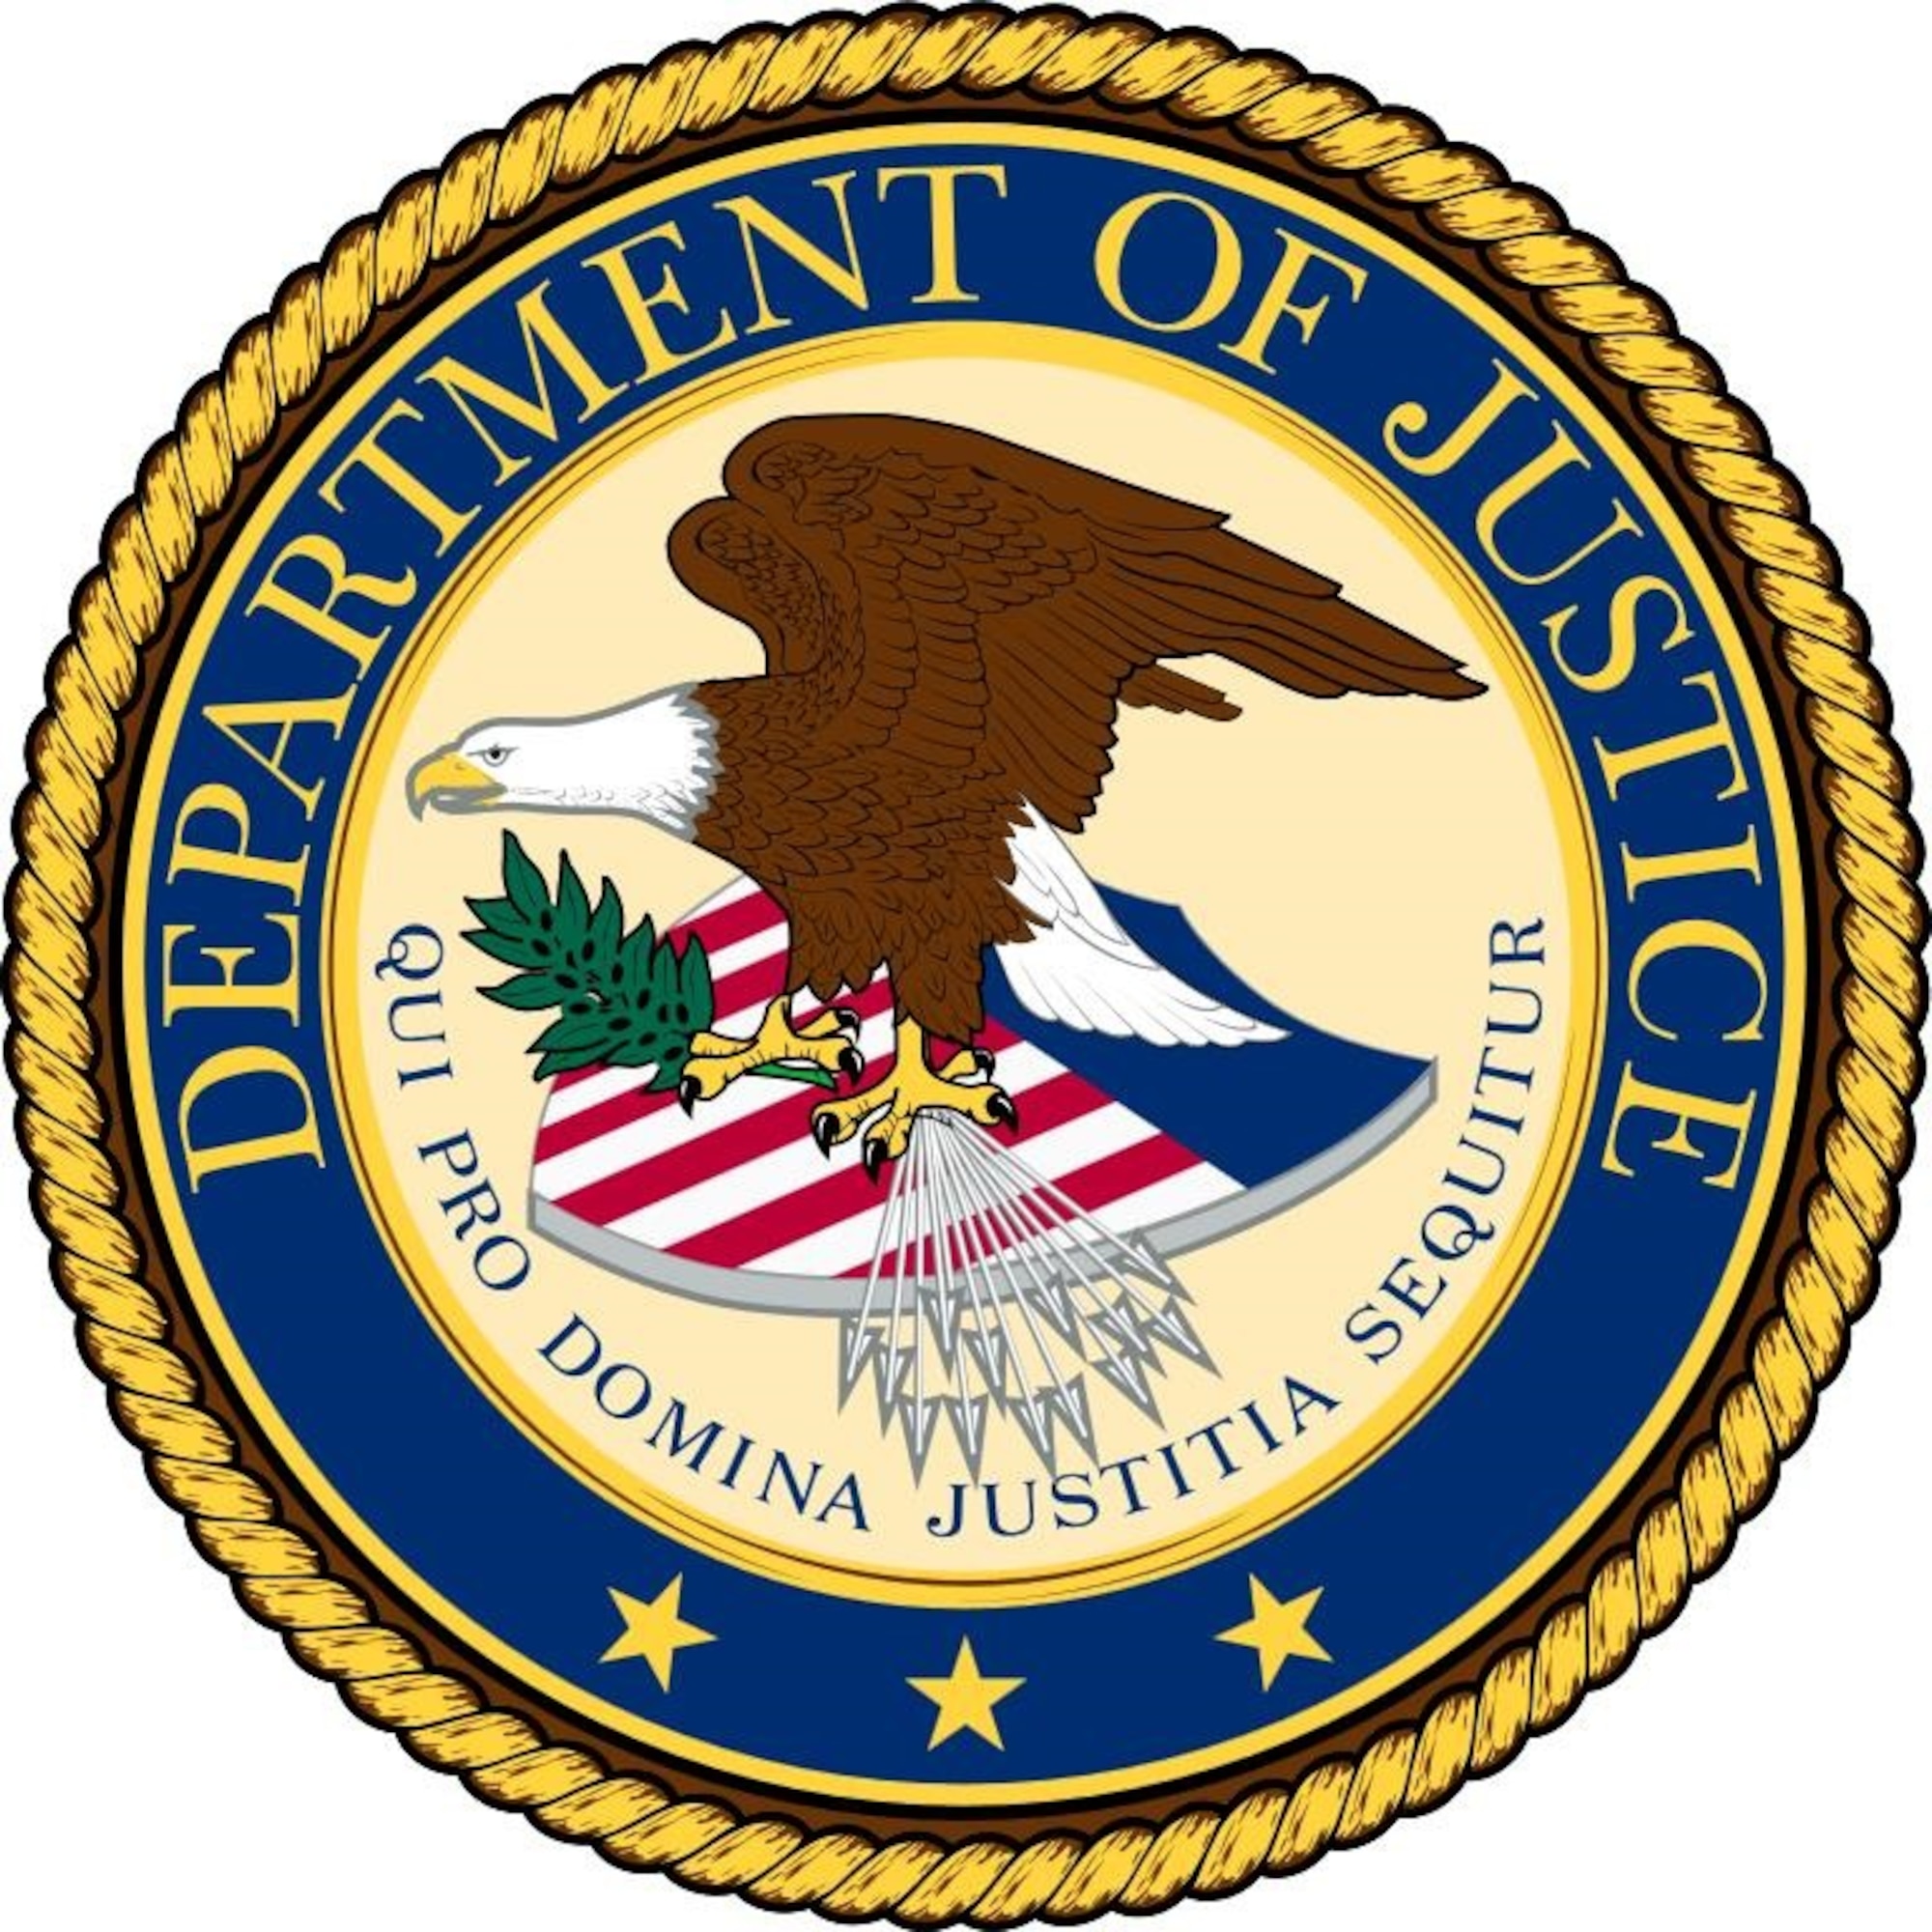 A San Antonio man was sentenced in a federal court here April 24 to 188 months in prison for wire fraud and tax fraud. According to court documents, he was a civilian government employee authorized by the Air Force to solicit and accept orders for flight simulator technology and support, and to promote and manage related contracts. (Dept. of Justice graphic)